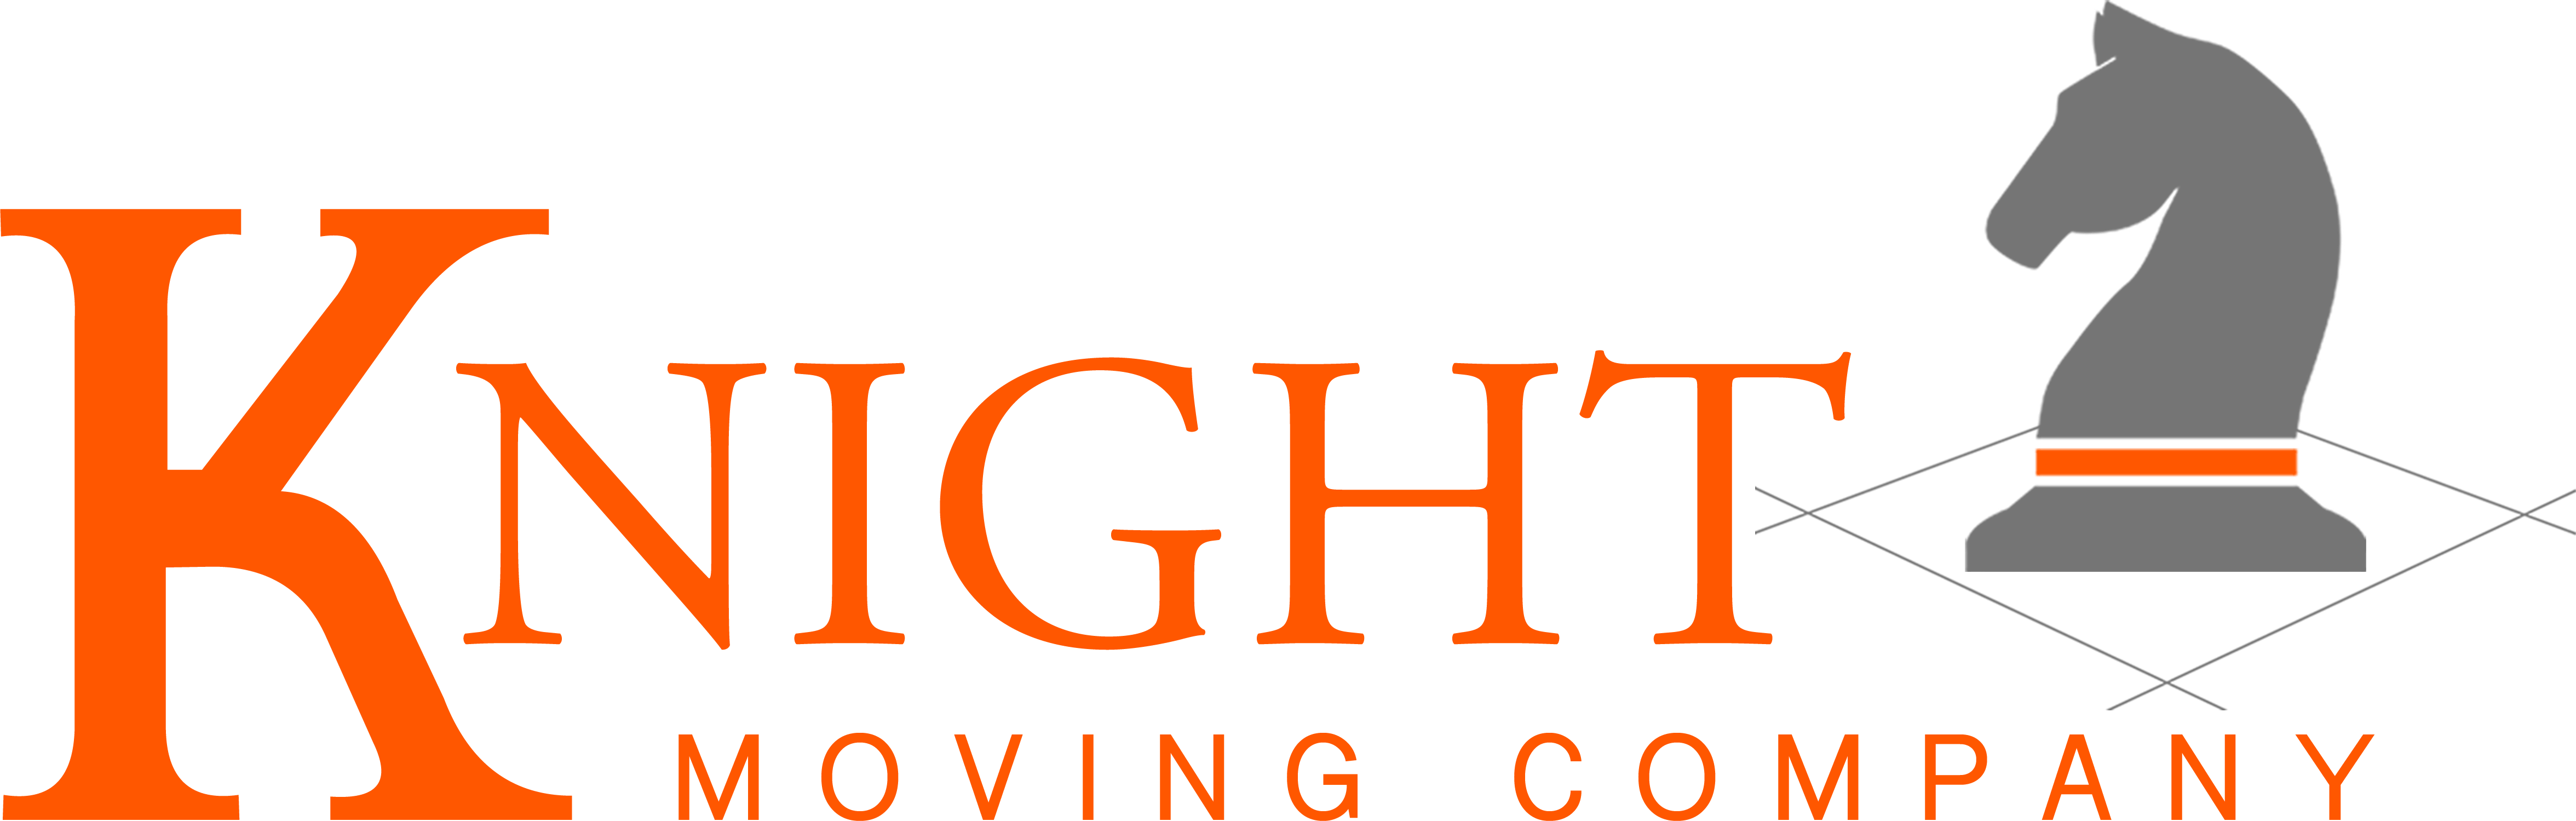 Knight Moving Company Horse Chess Piece Logo PNG